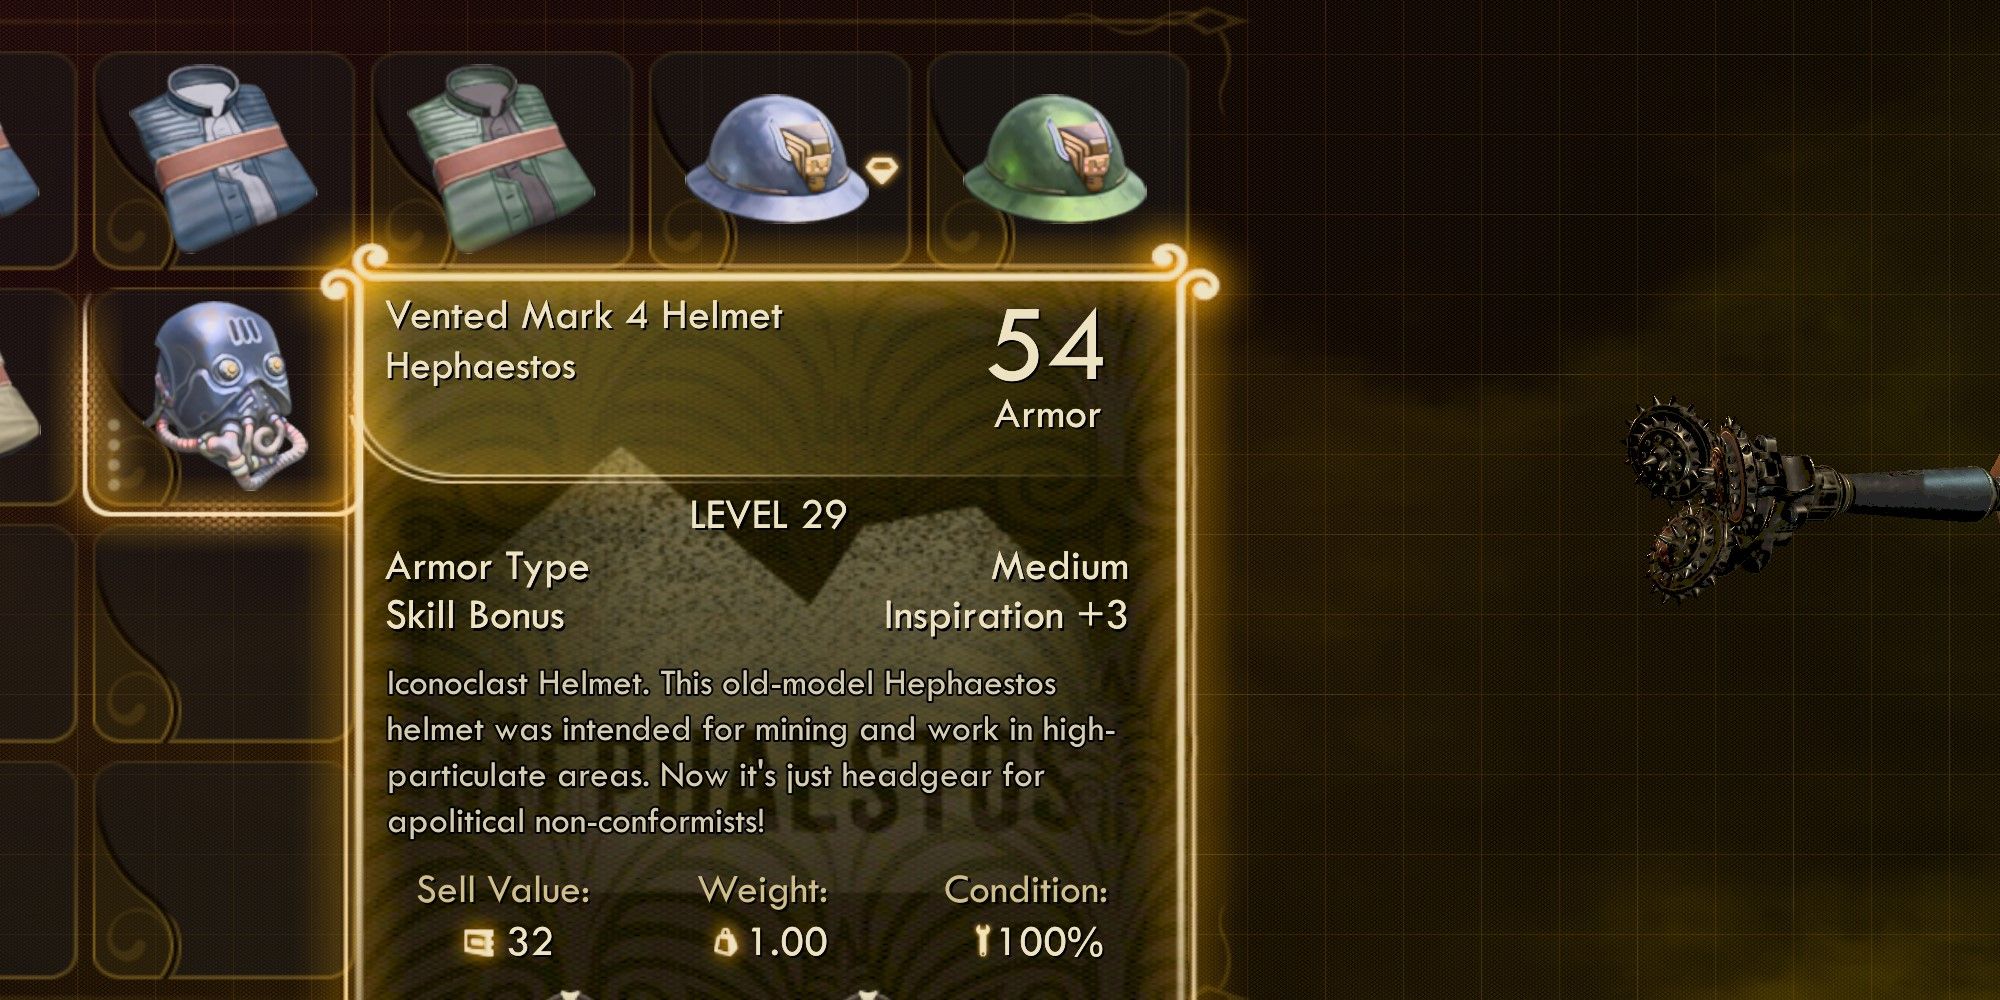 The Outer Worlds Iconoclast Helmet description in shop